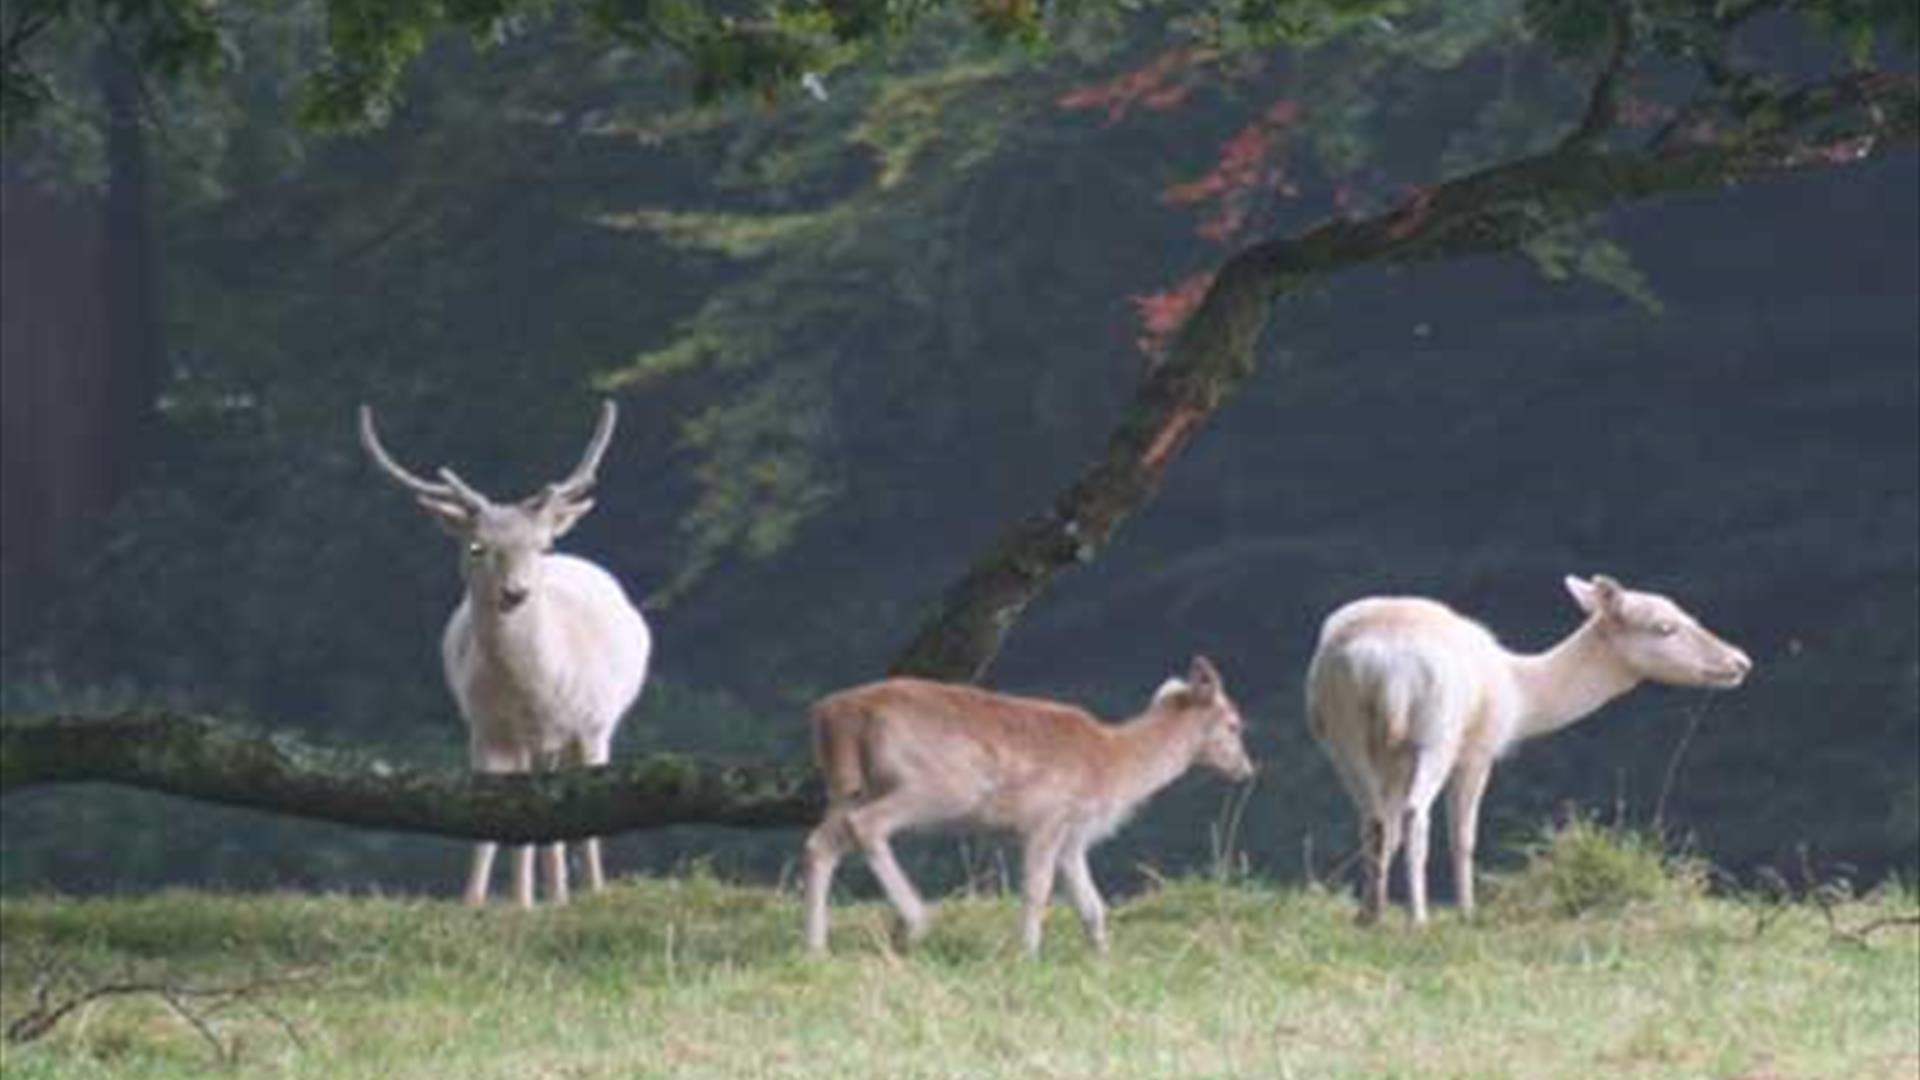 Image of three deer from across a field